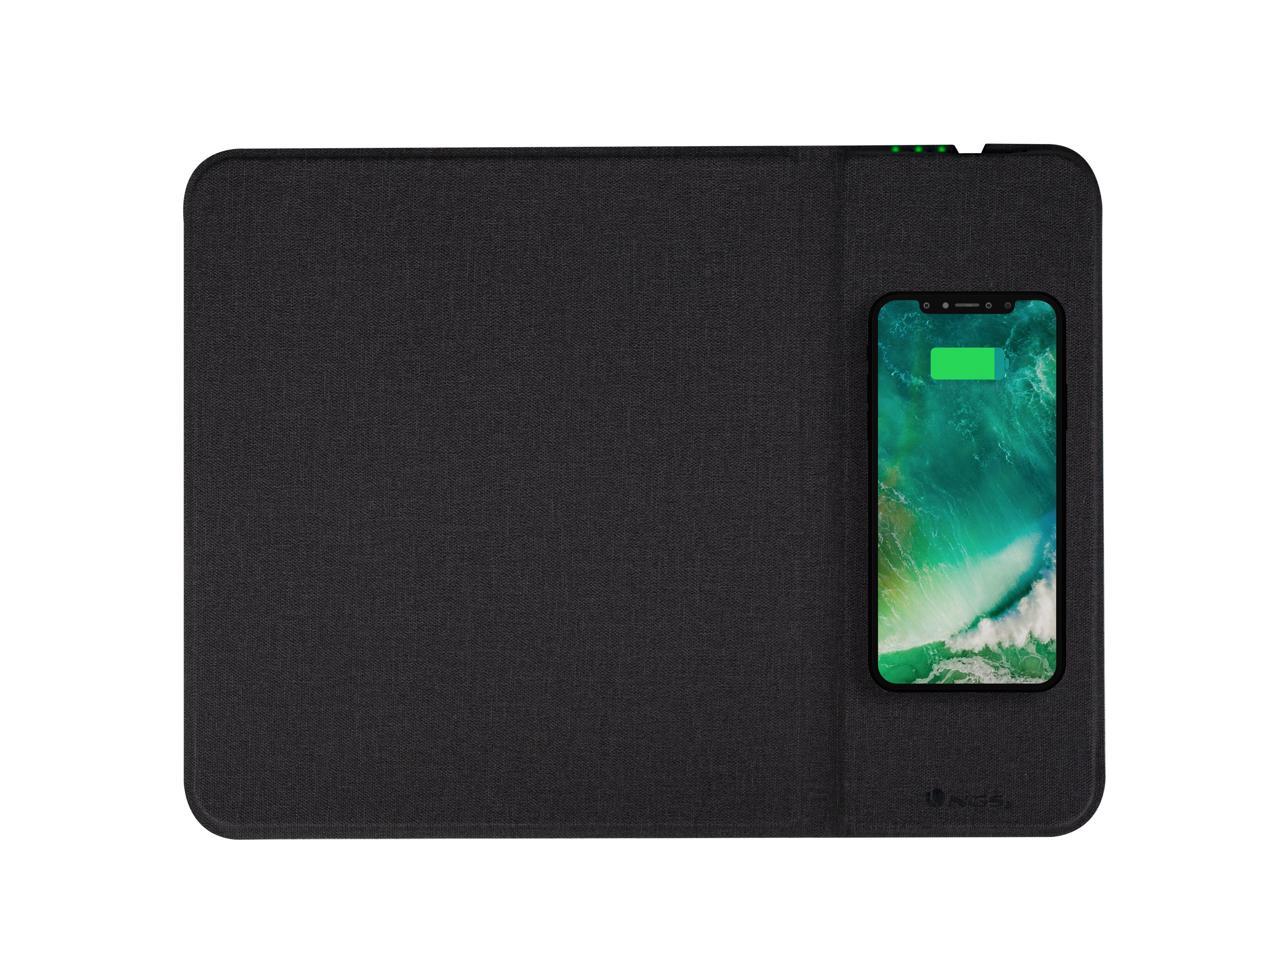 NGS Wireless Charging Mousepad for Qi-compatible Mice and Mobile Phones - Pier